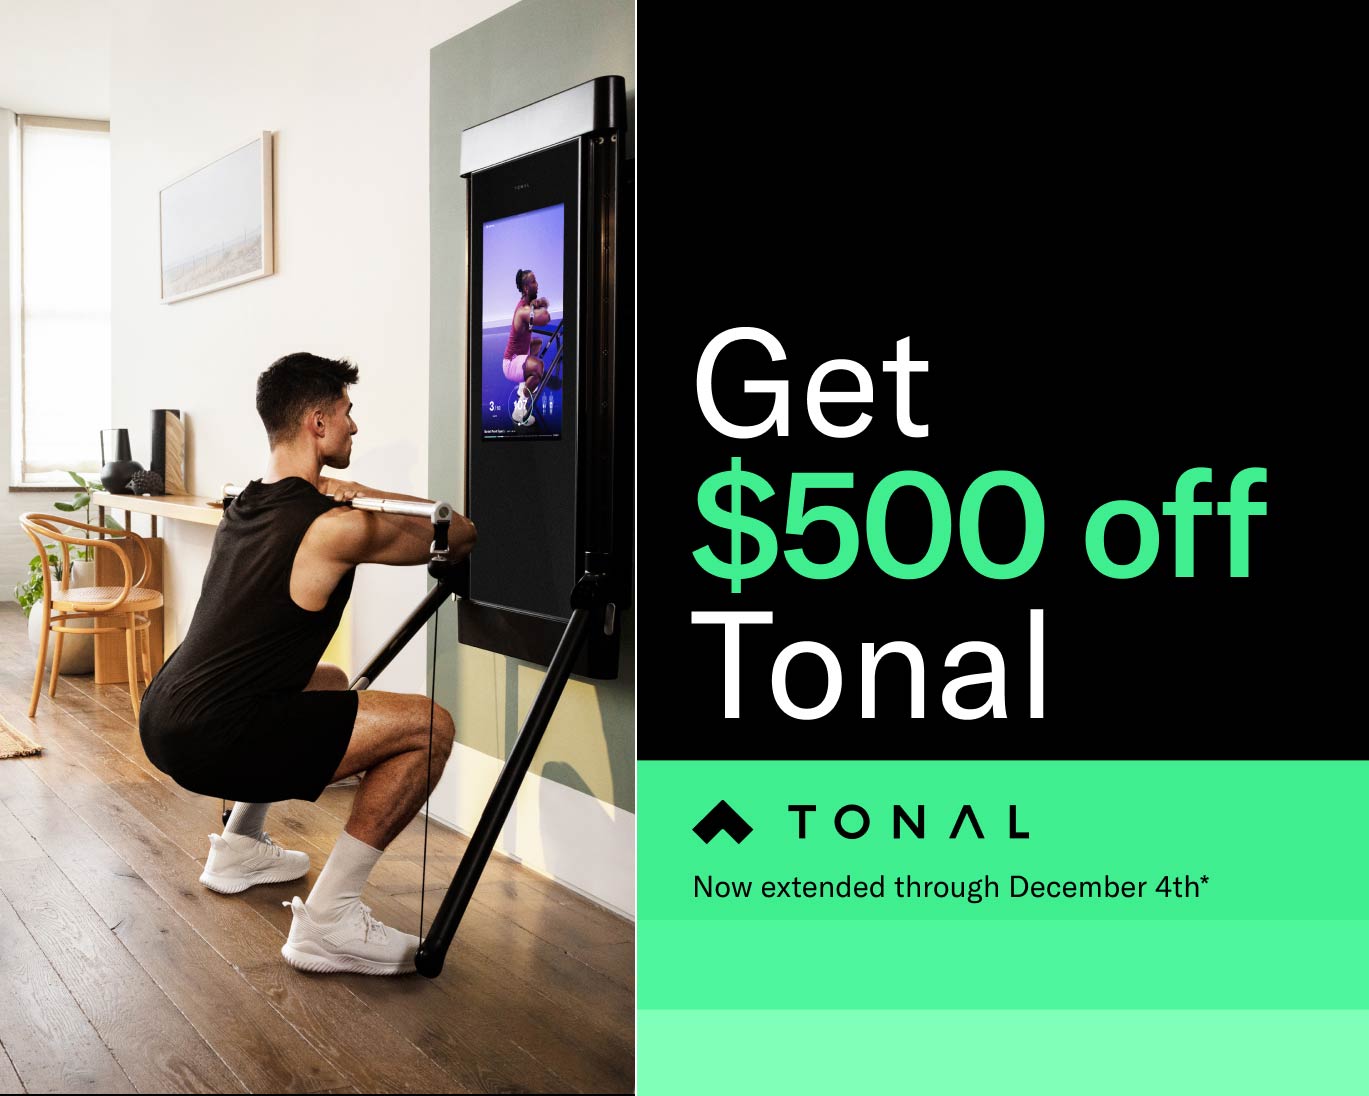 Get $500 off Tonal - Now extended through December 4th